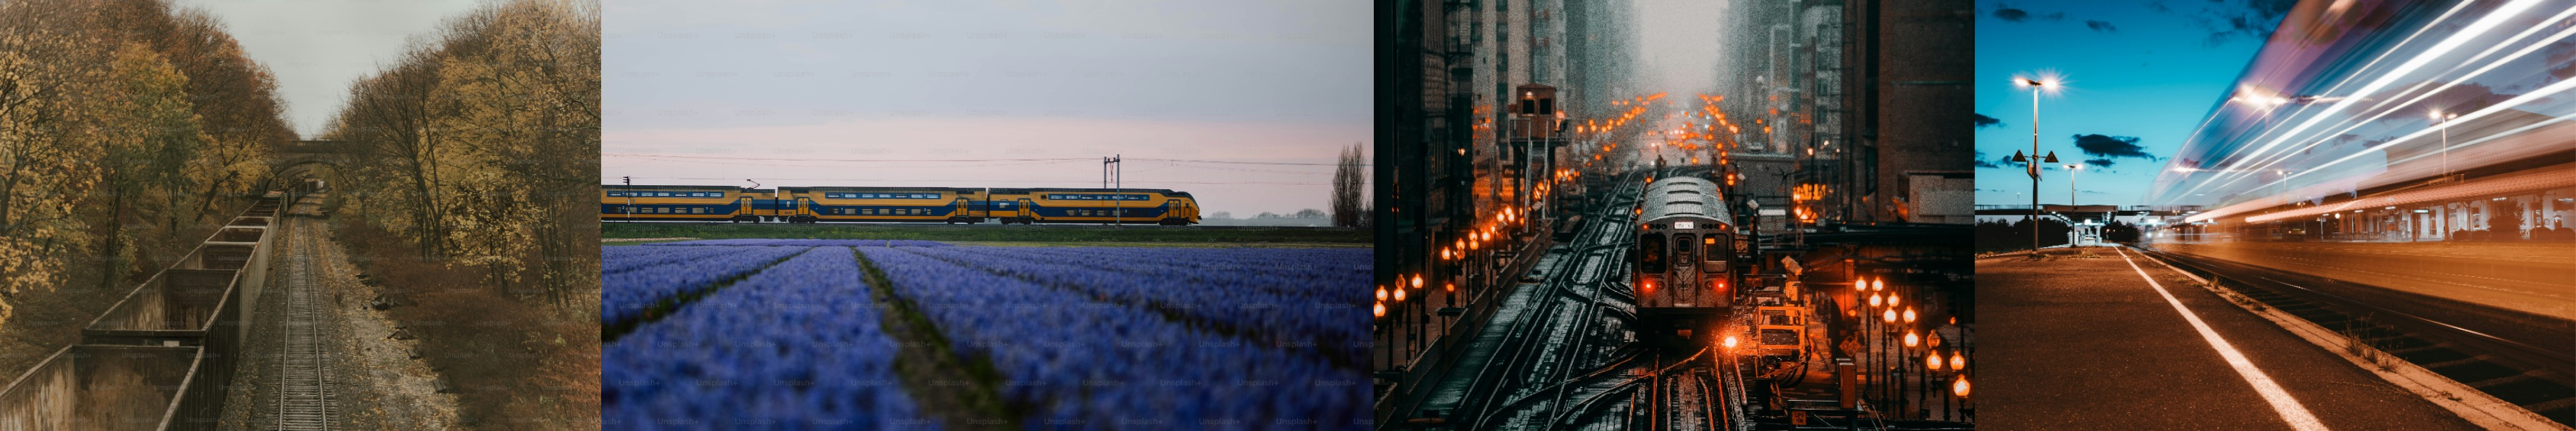 Various train images